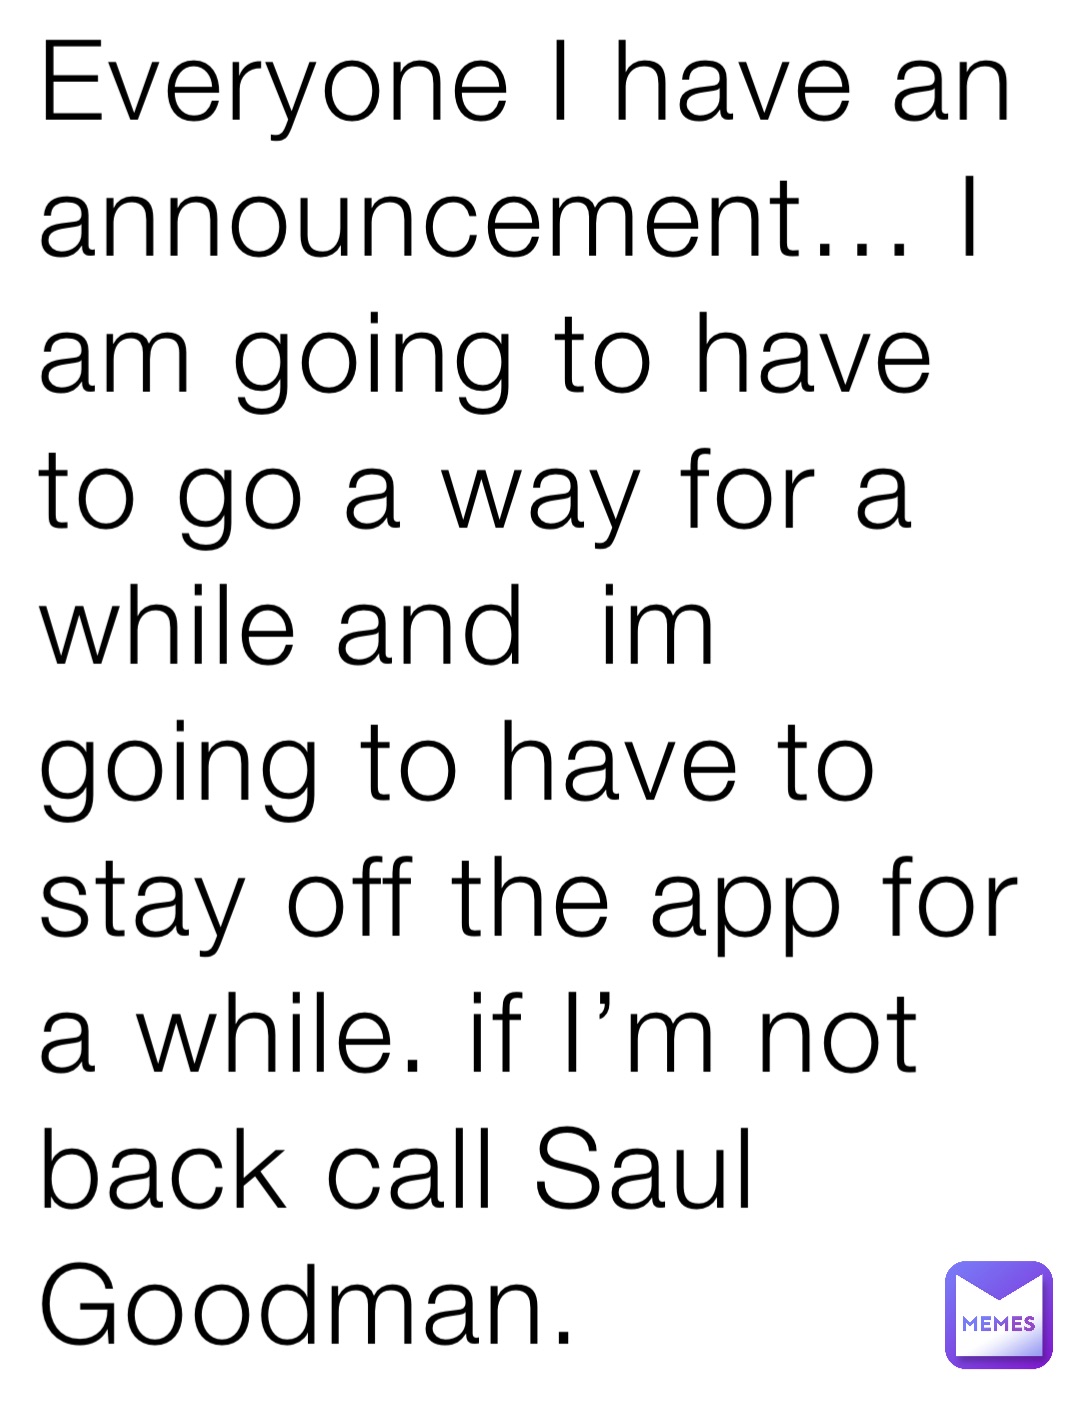 Everyone I have an announcement… I am going to have to go a way for a while and  im going to have to stay off the app for a while. if I’m not back call Saul Goodman.